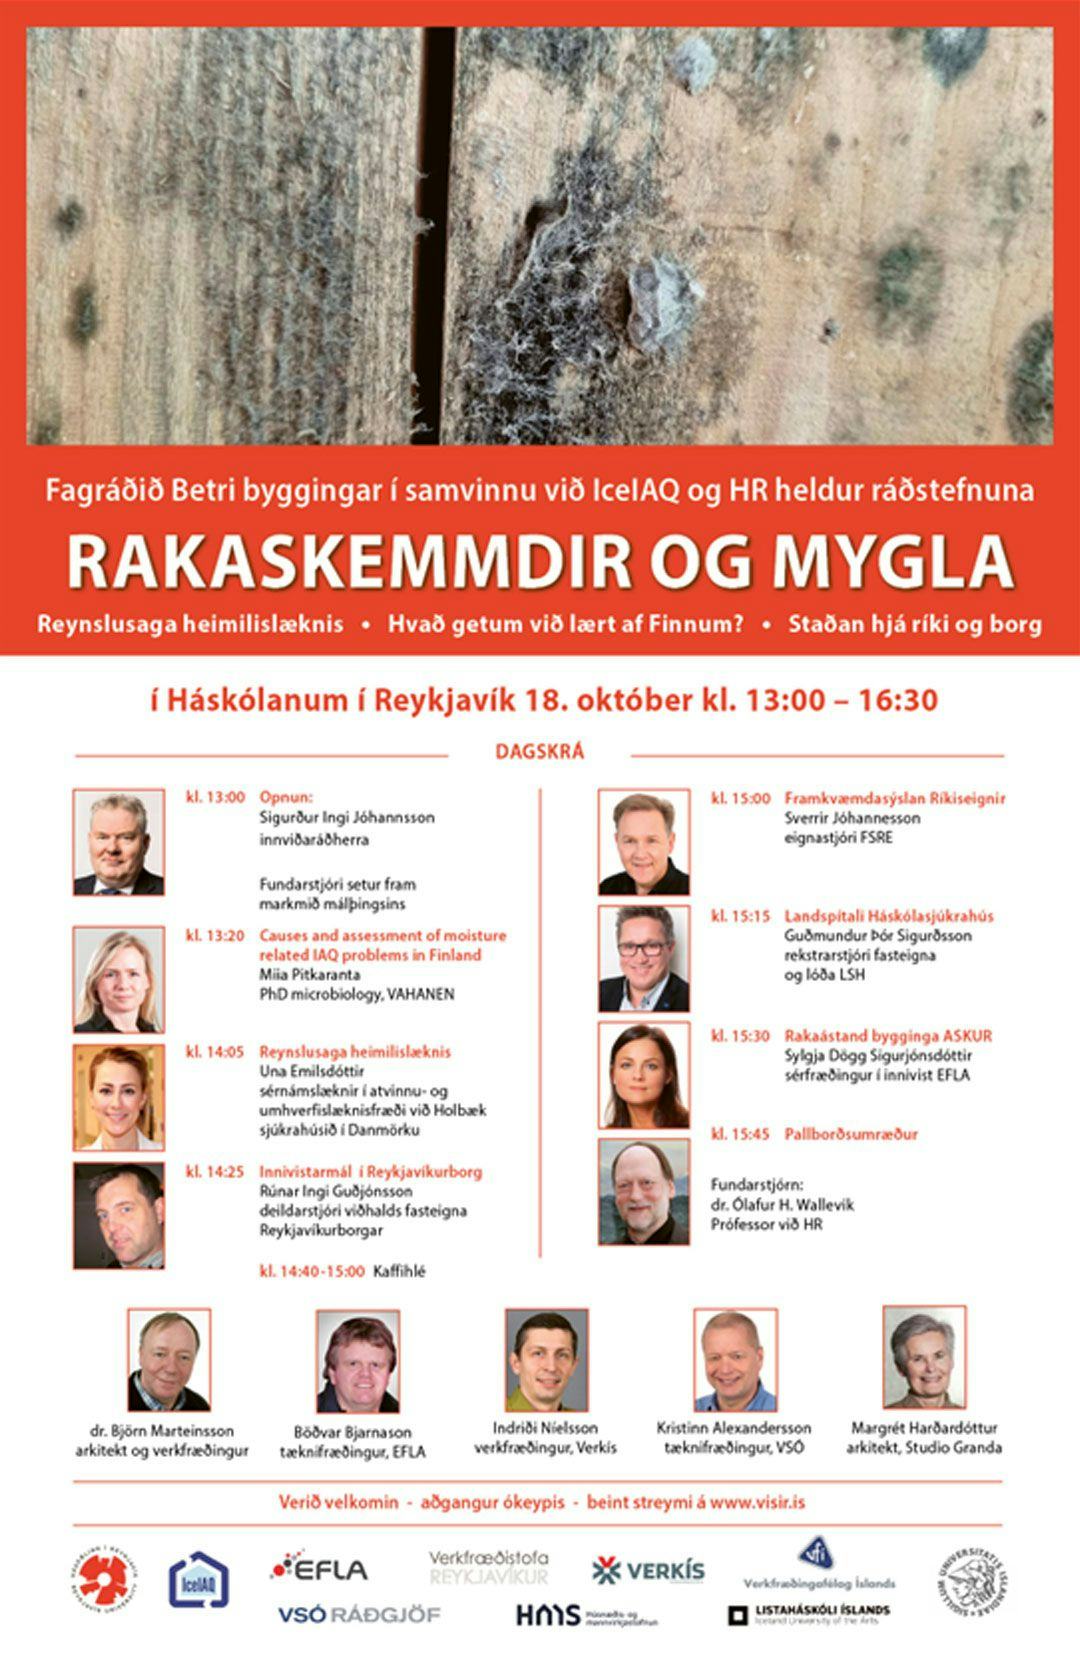 The photo shows a schedule with speakers headshot and a close-up photo of moldy wood